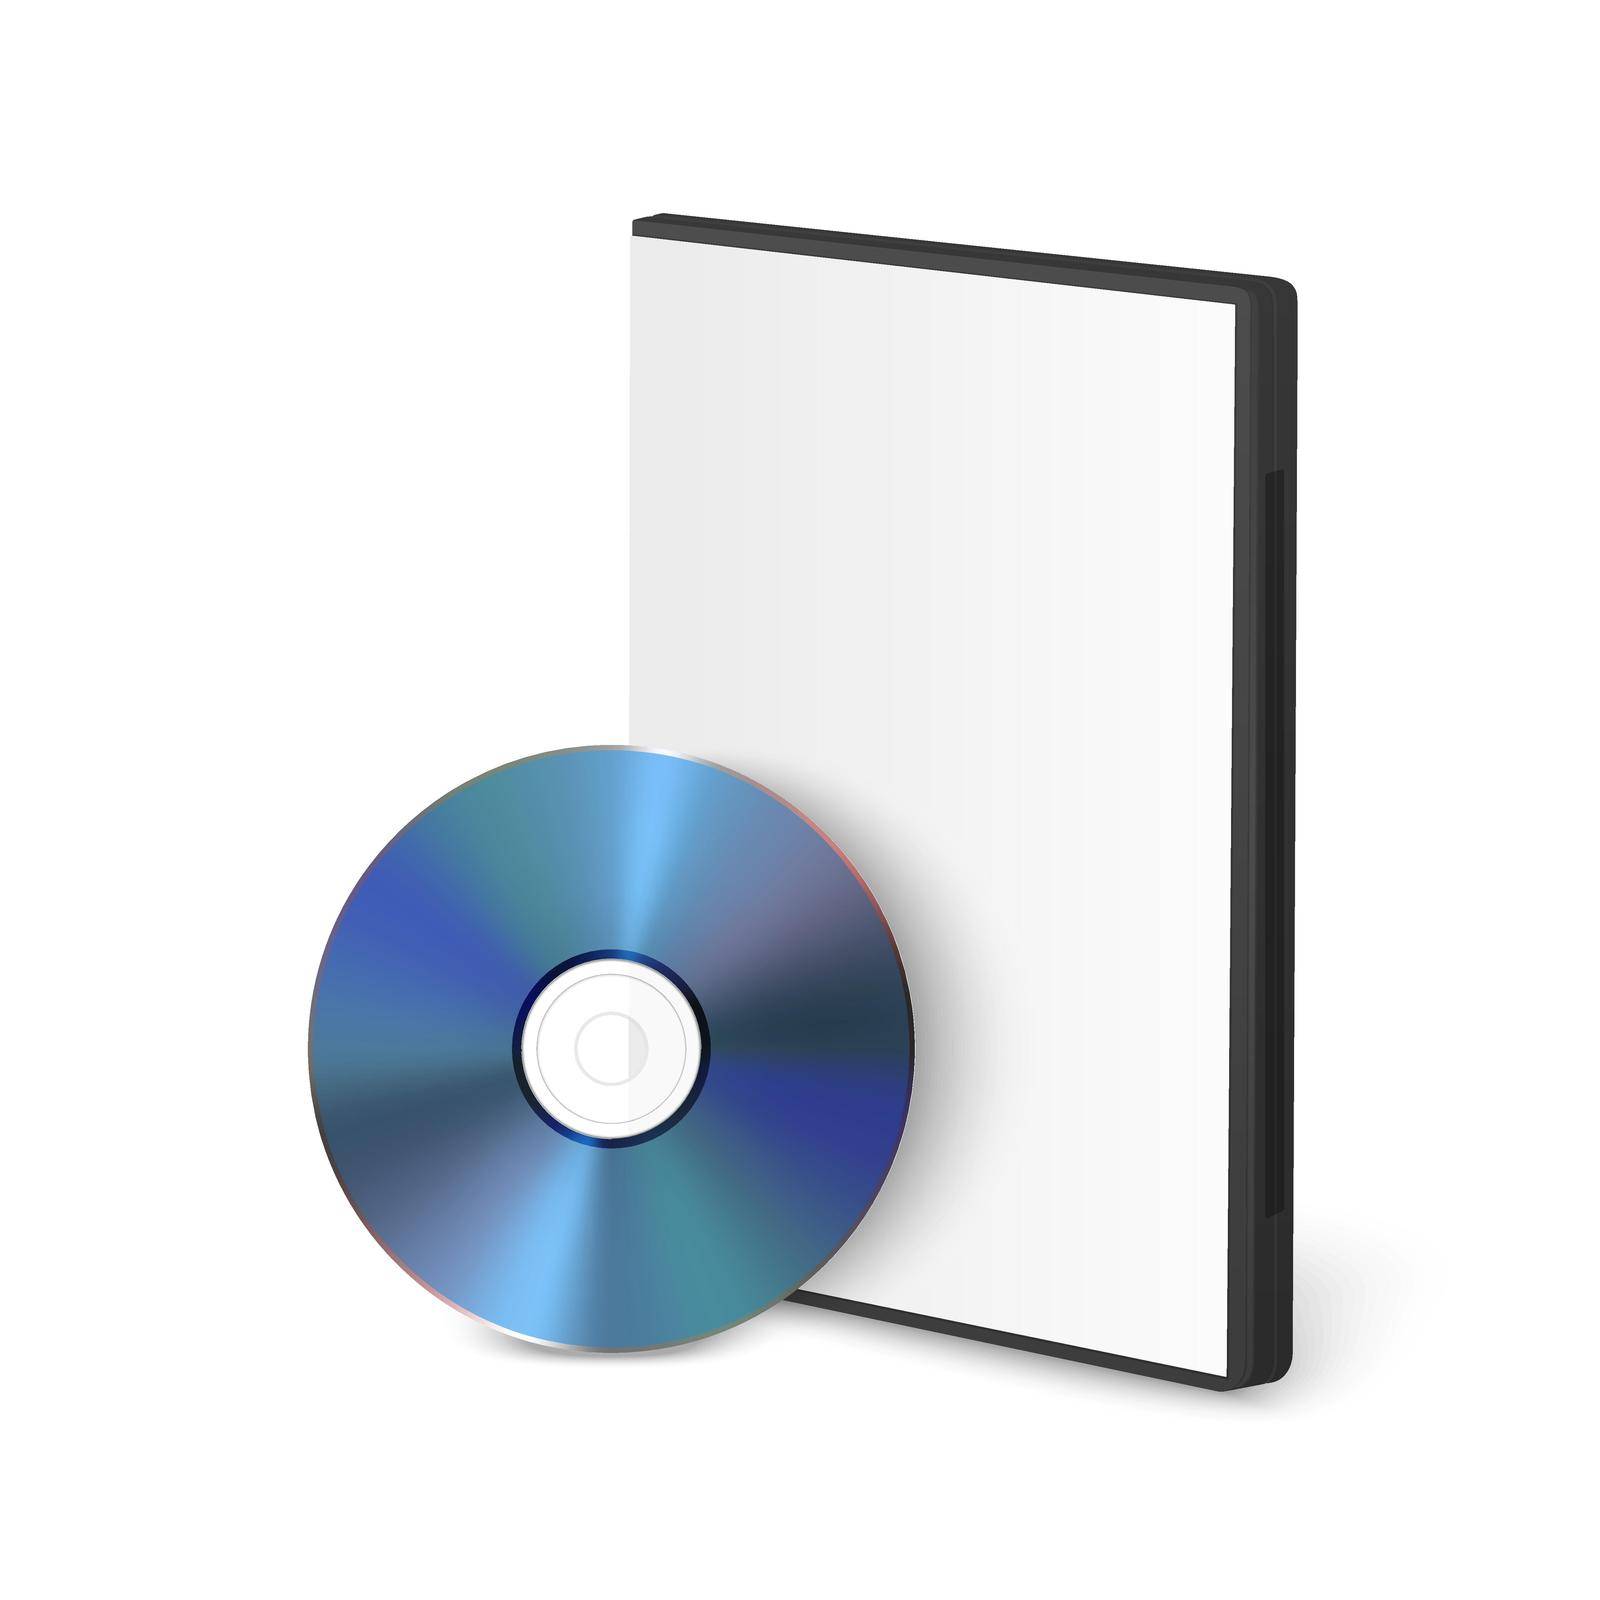 Vector 3d Realistic Blue CD, DVD with Case Isolated on White. CD Box, Packaging Design Template for Mockup. Compact Disk Icon, Front View.